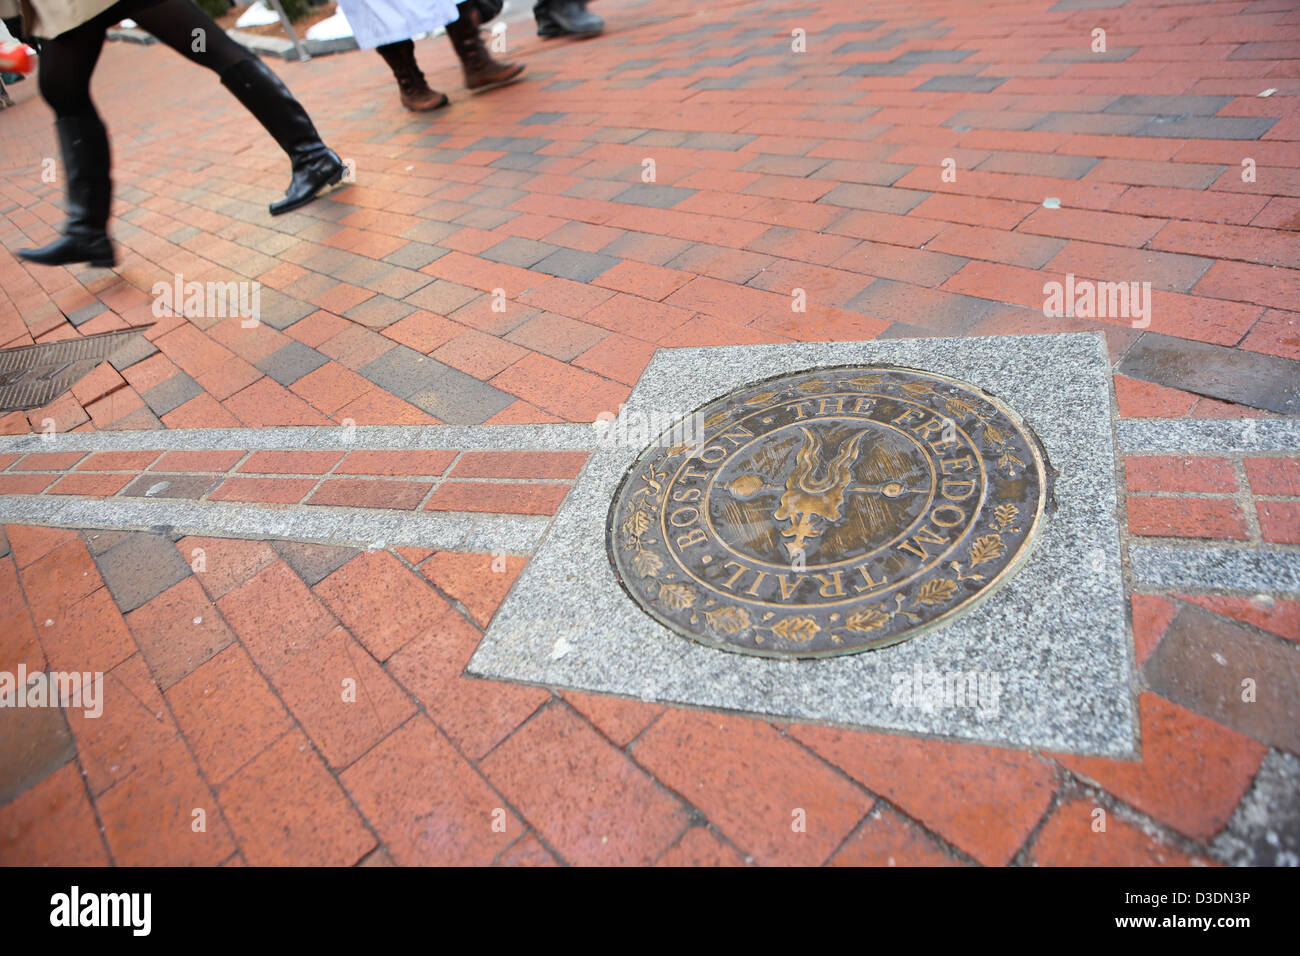 Feb. 15, 2013 - Boston, Massachusetts, U.S - Boston's Freedom Trail is a 2.5 mile walk through Boston that leads to 16 significant historic sites. The trail is photographed on Friday, February 15, 2013. (Credit Image: © Nicolaus Czarnecki/ZUMAPRESS.com) Stock Photo